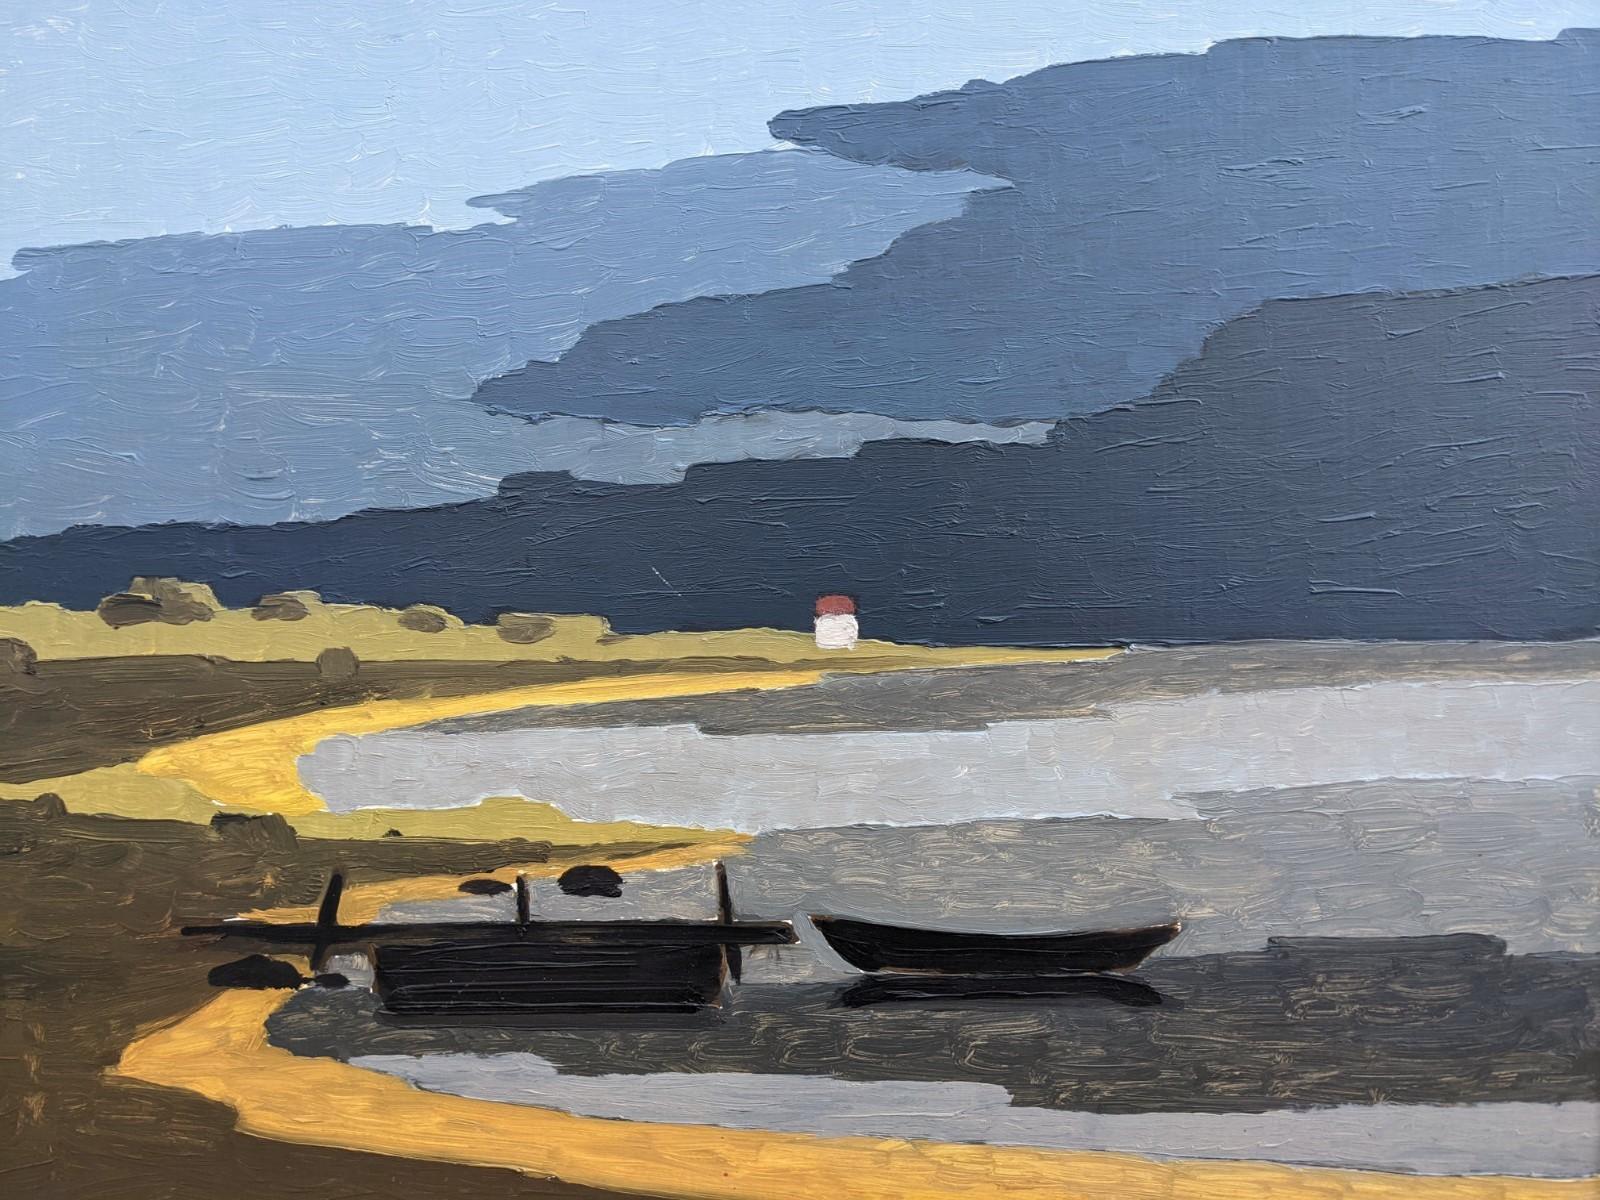 Lake Land
Size: 55 x 64 cm (including frame)
Oil on board

A brilliantly executed modernist landscape composition in oil, painted in 1970.

In this picture, two boats sit in shallow waters, and behind them we see a small cottage that is backed by